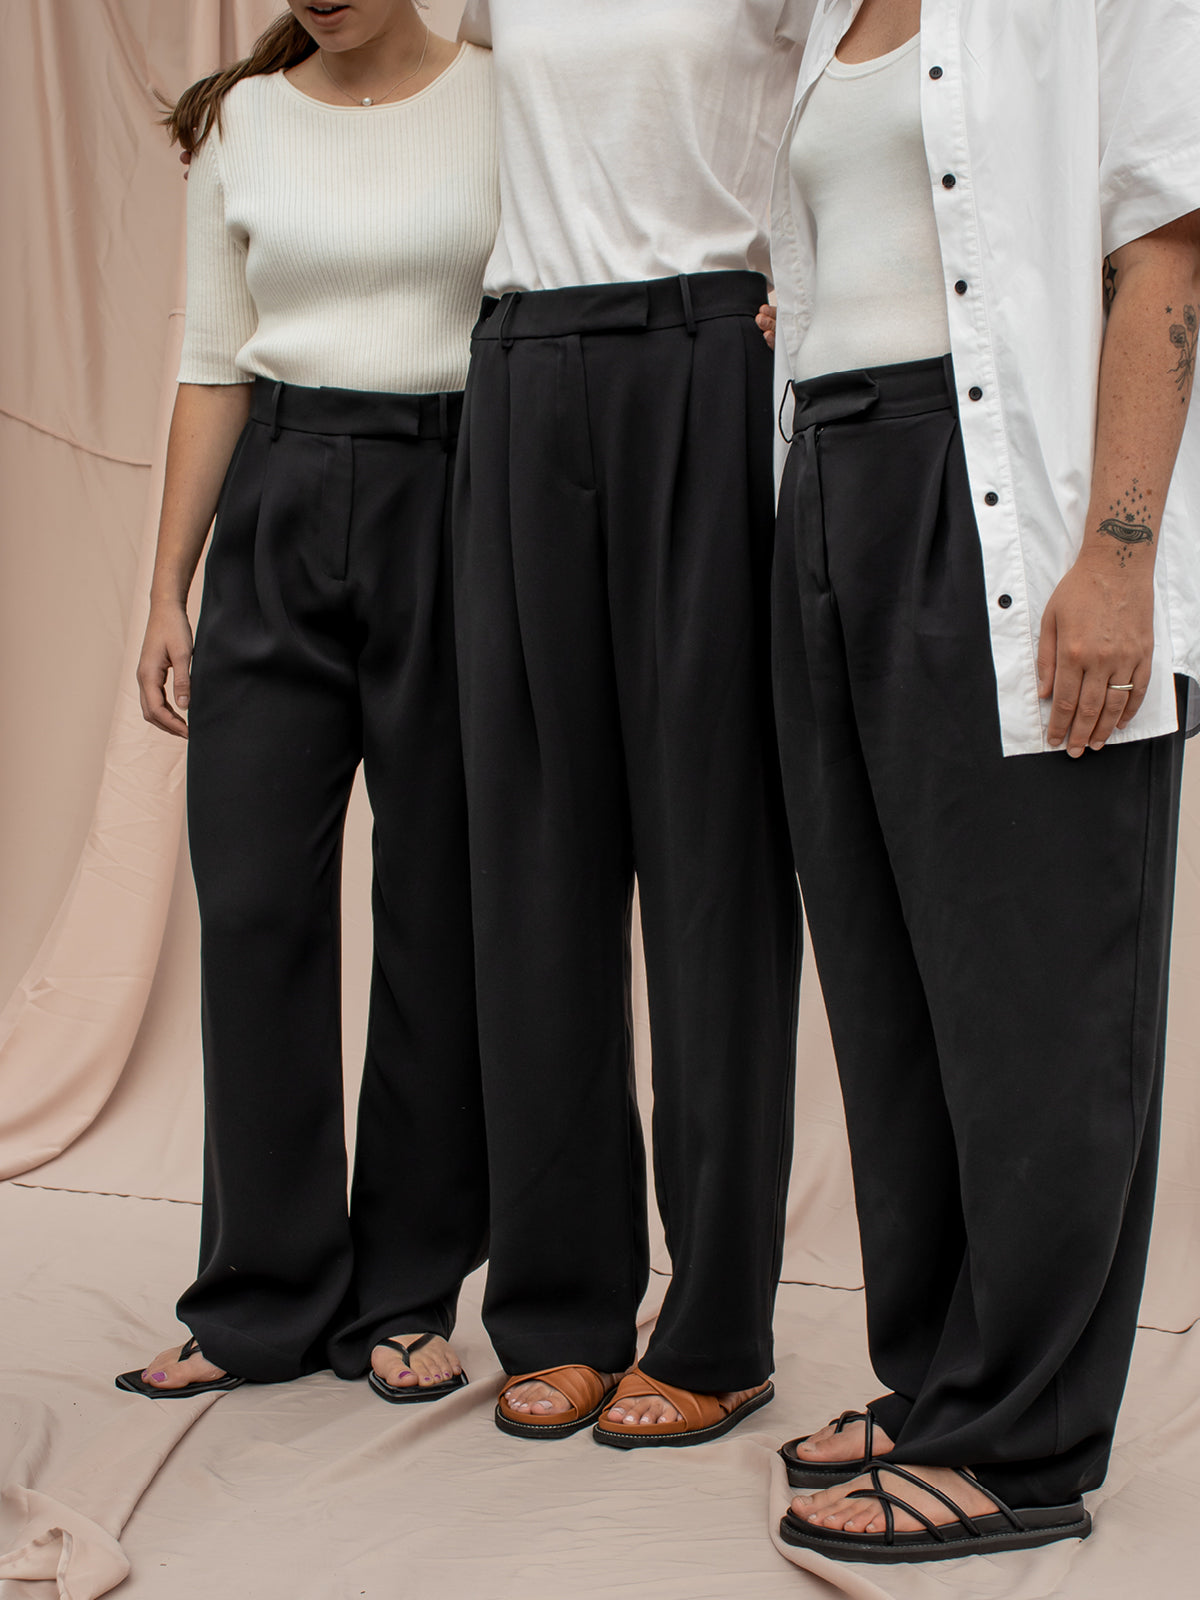 The Trouser Edit – Find your perfect pair